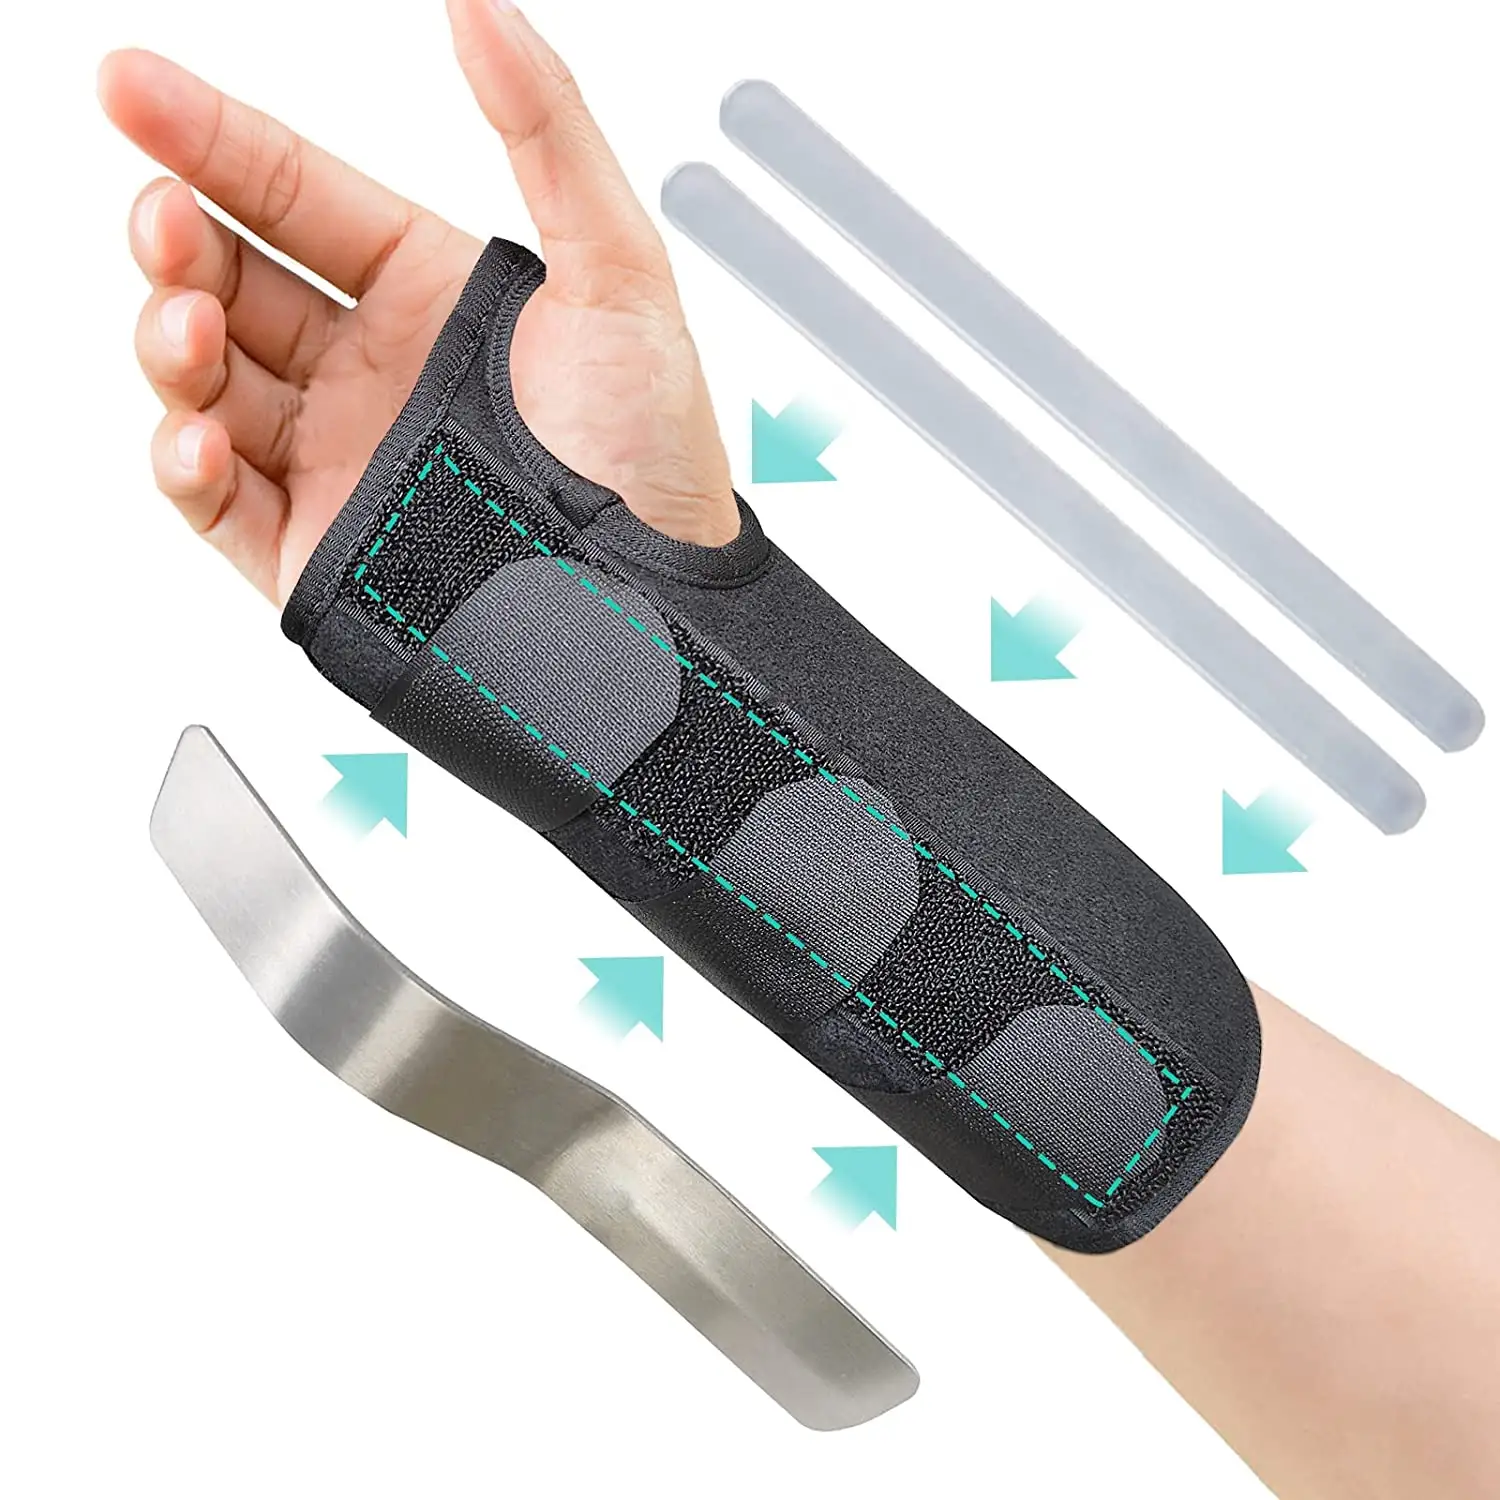 medical Carpal Tunnel Wrist Brace for Men and Women, Adjustable Wrist Support with Metal Splint